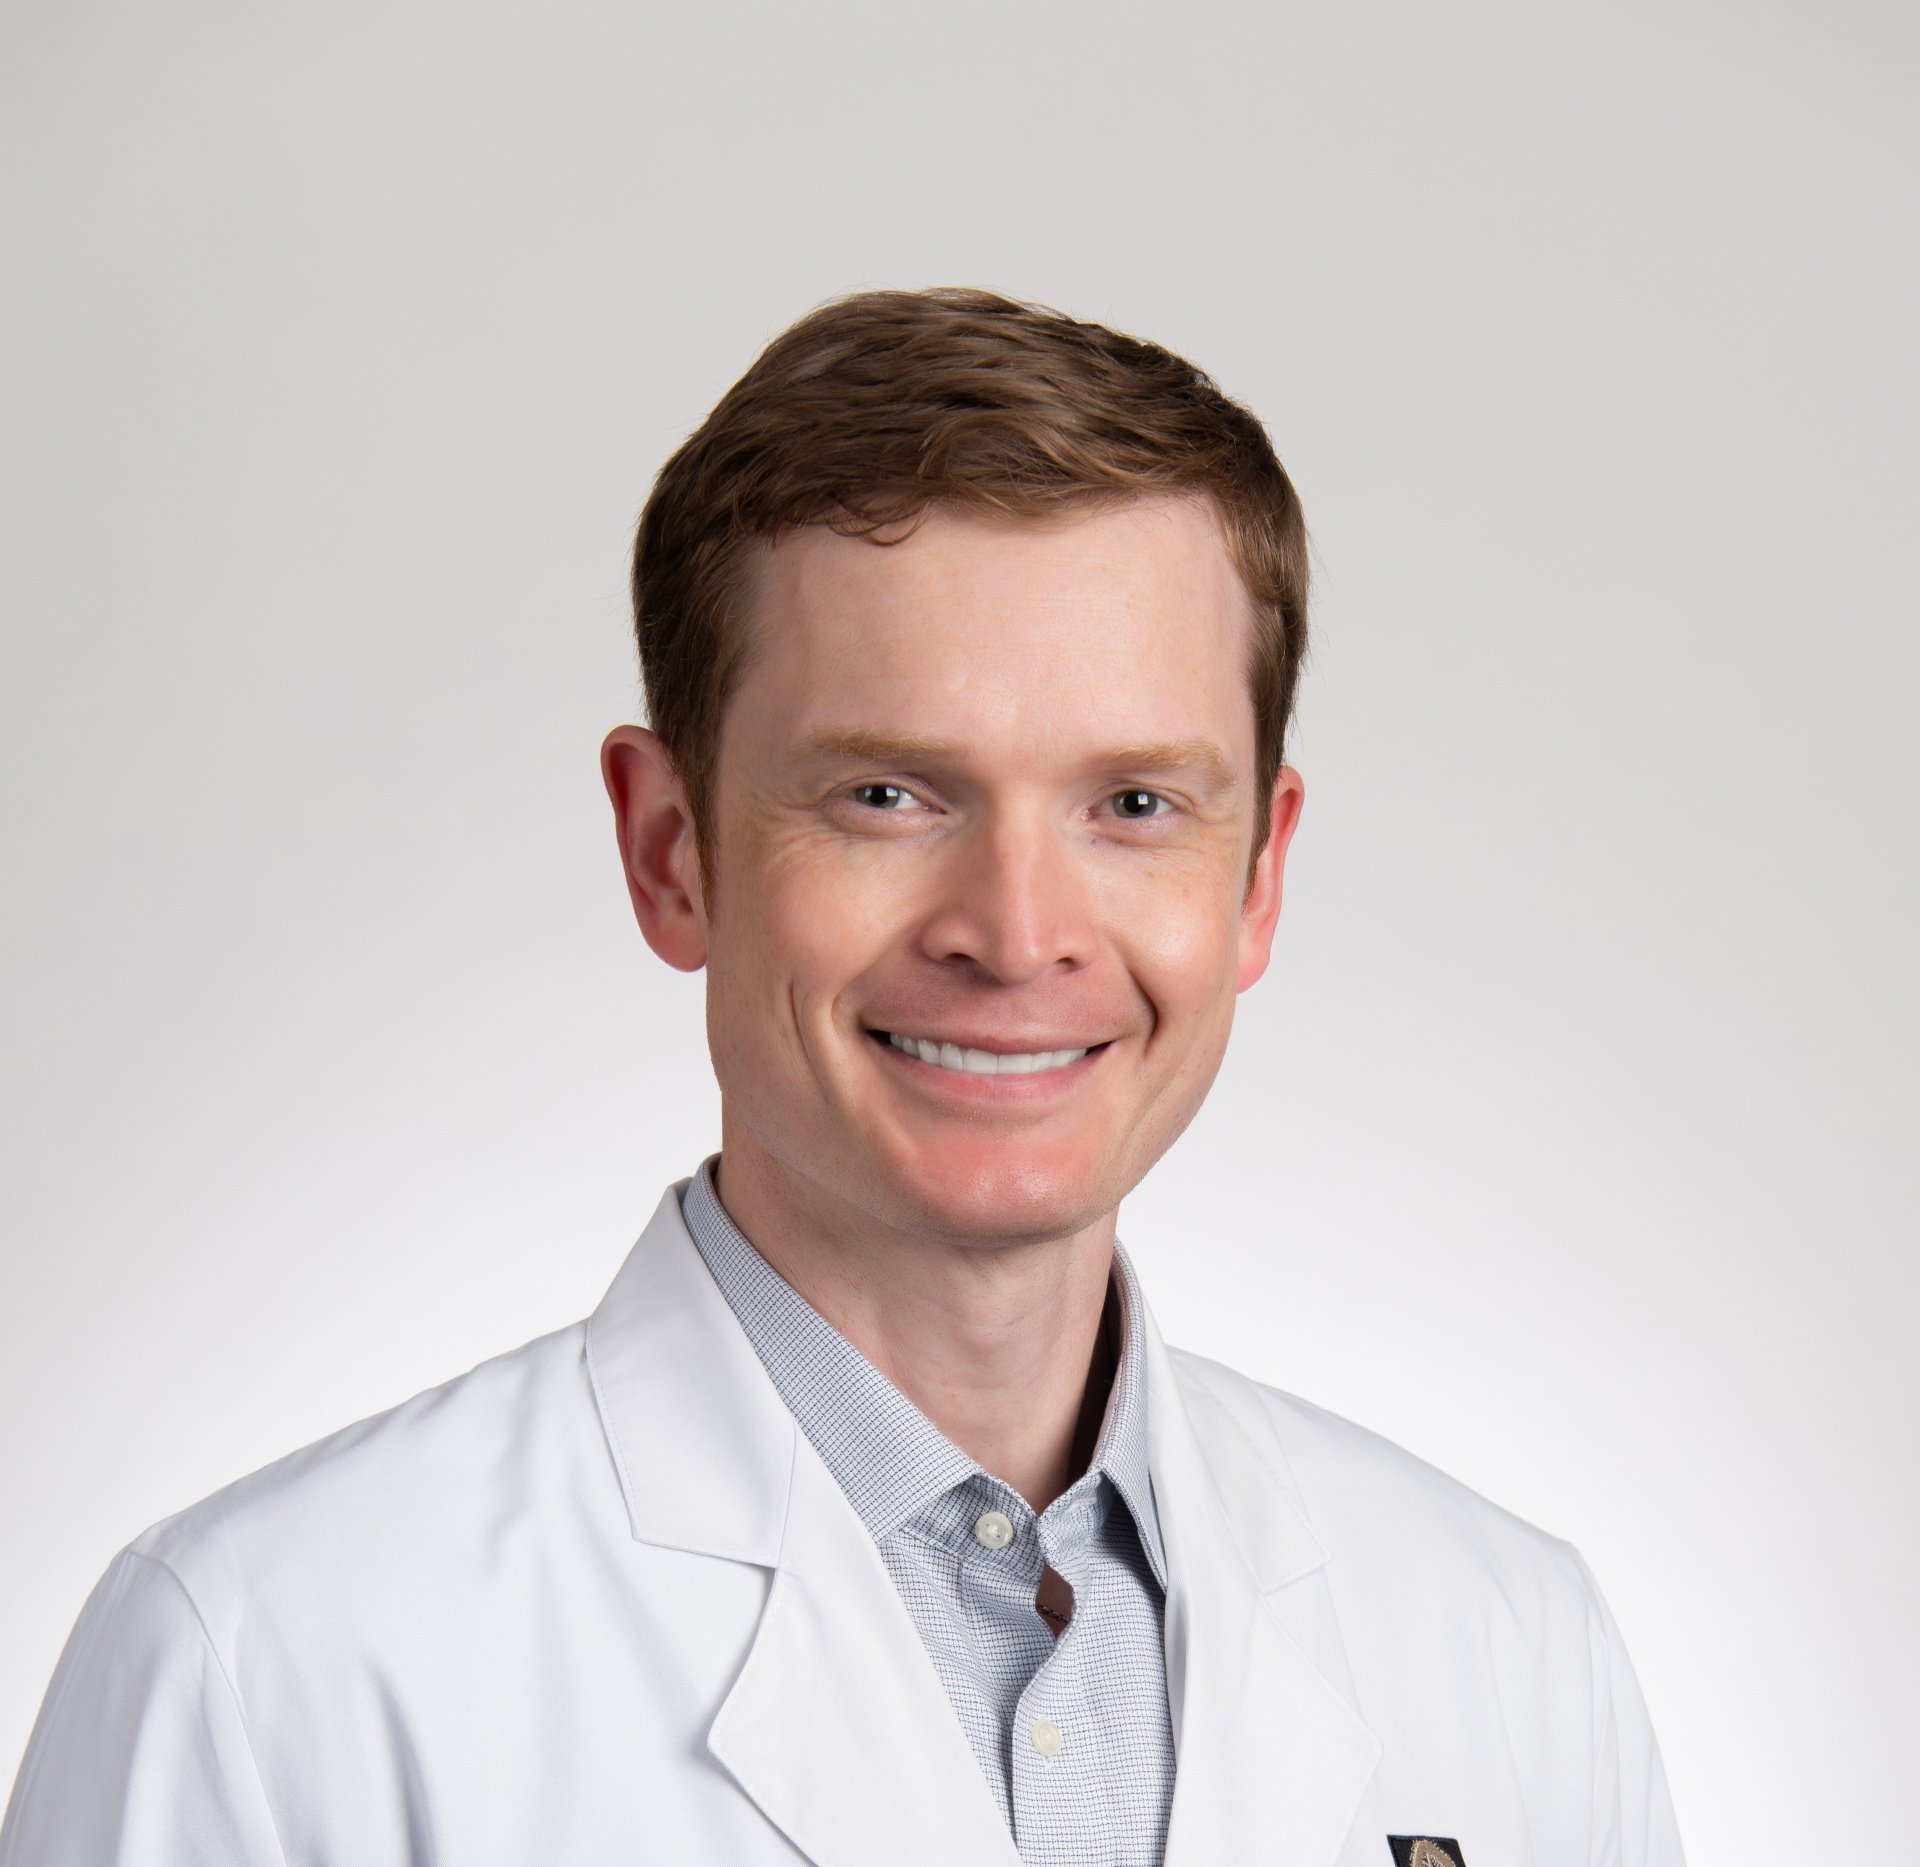 Dr. Arthur Hess Named Chief of Surgery at Our Lady of the Lake Regional Medical Center